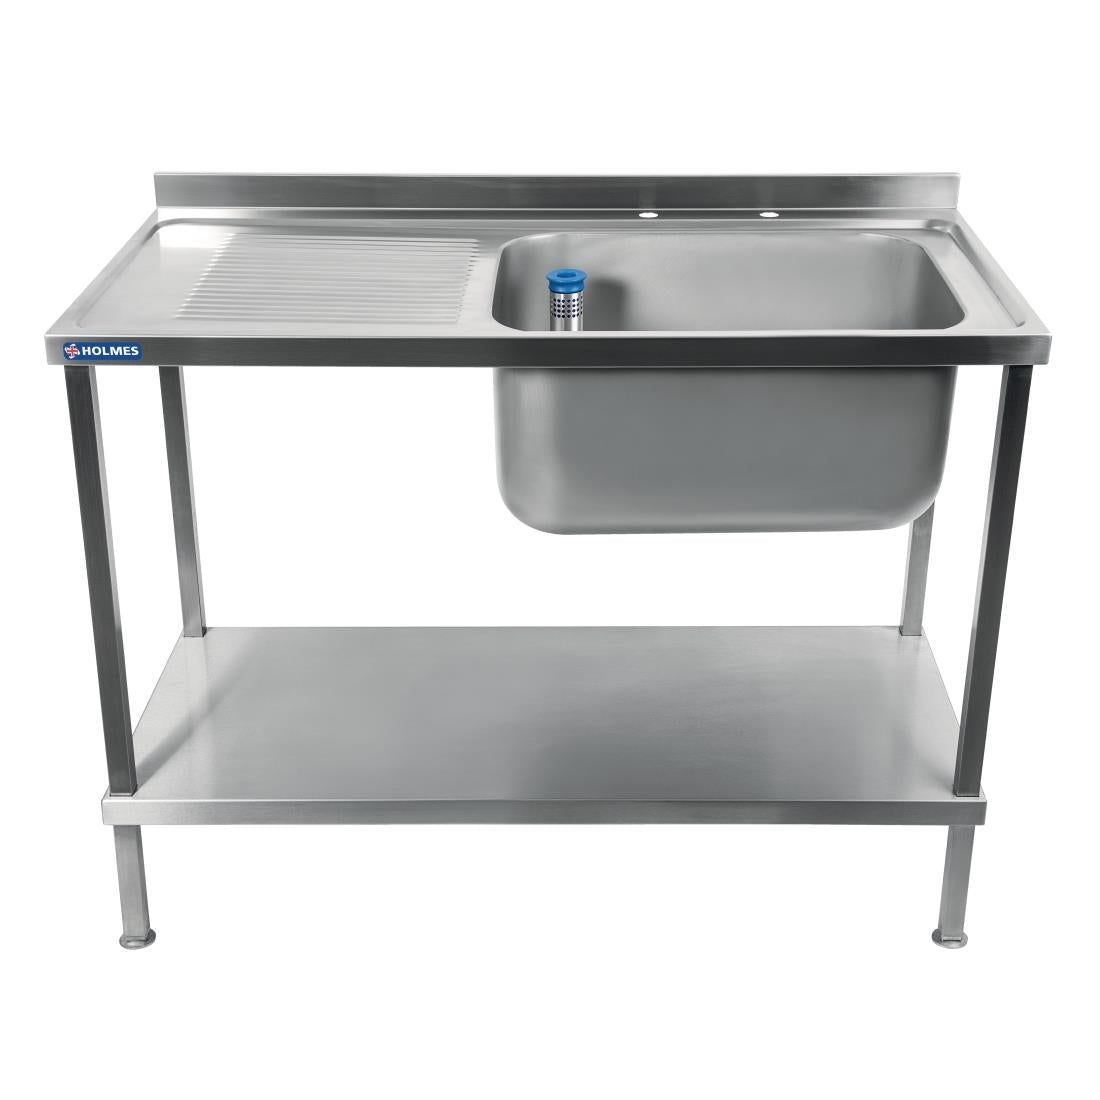 DR385 Holmes Fully Assembled Stainless Steel Left Hand Drainer 1500mm JD Catering Equipment Solutions Ltd